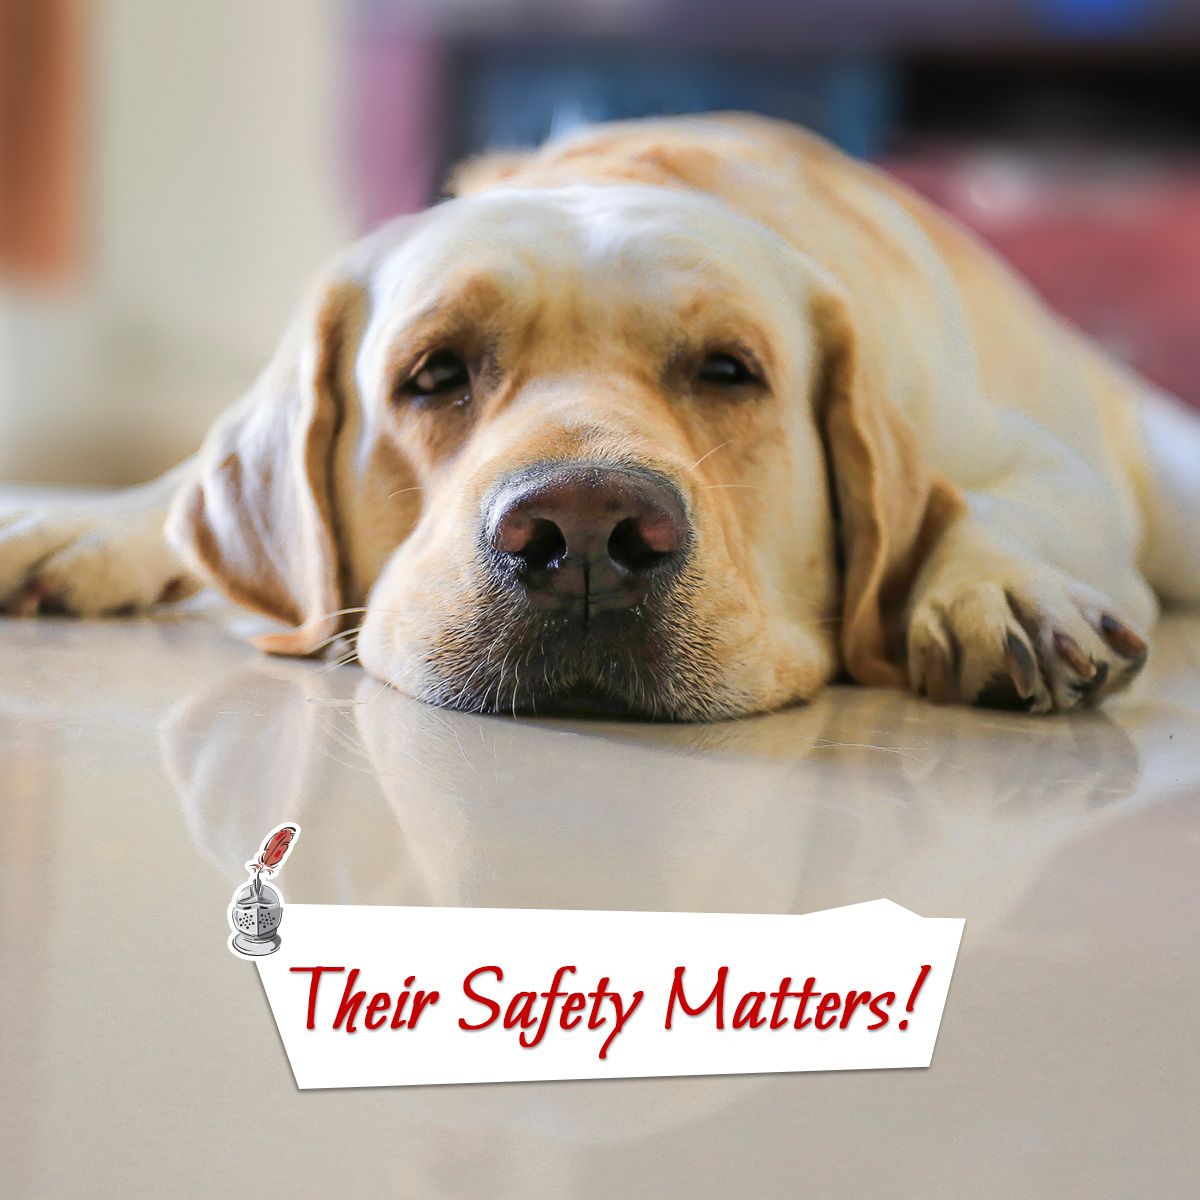 Their Safety Matters!